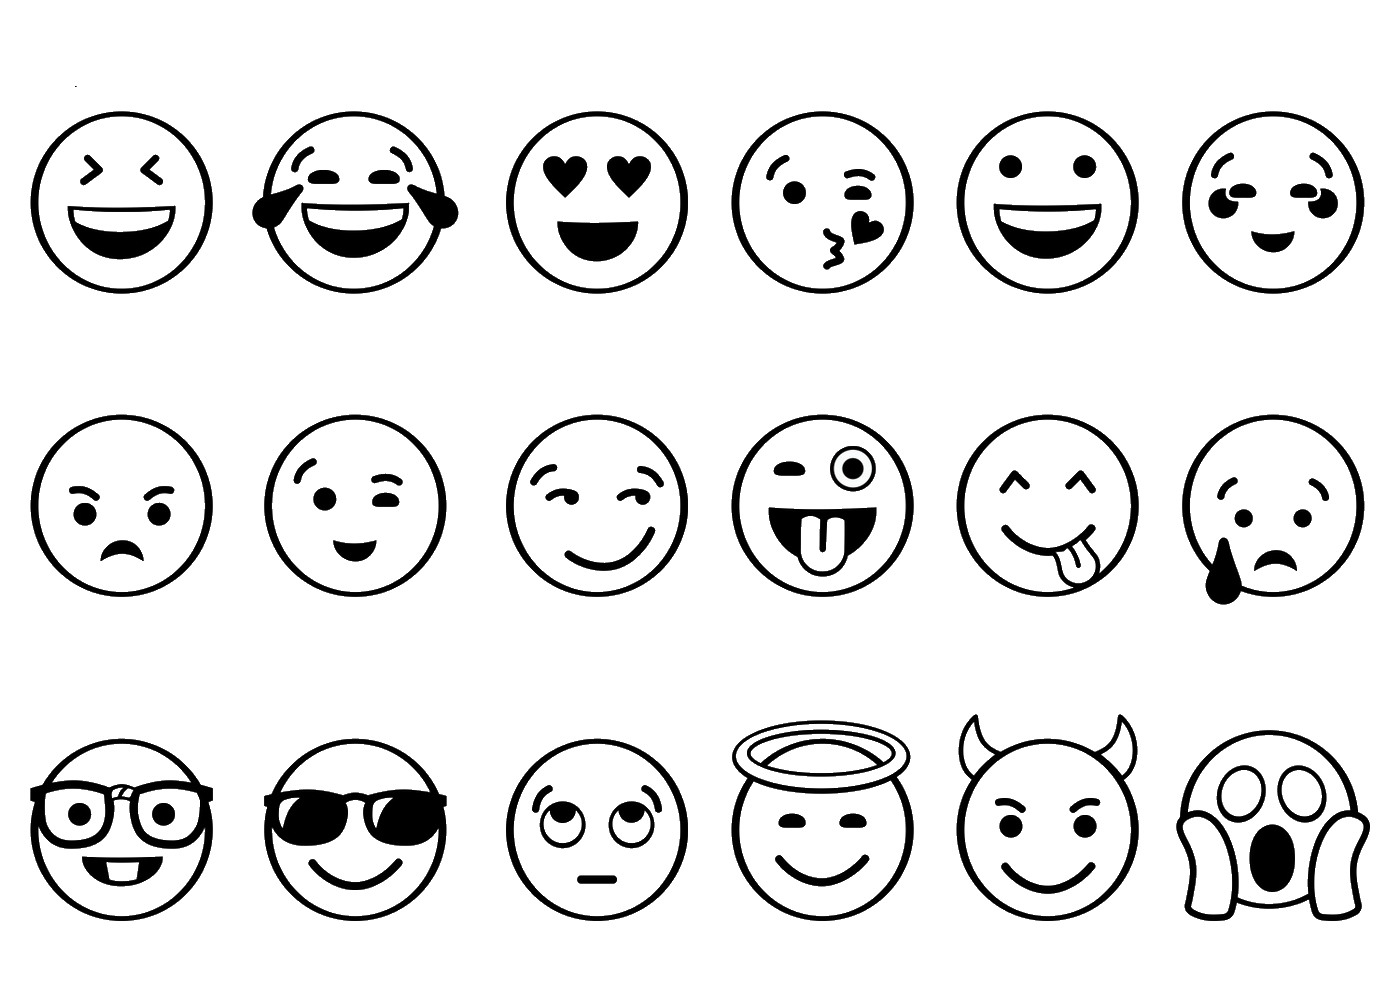 emoji coloring pages that you can print